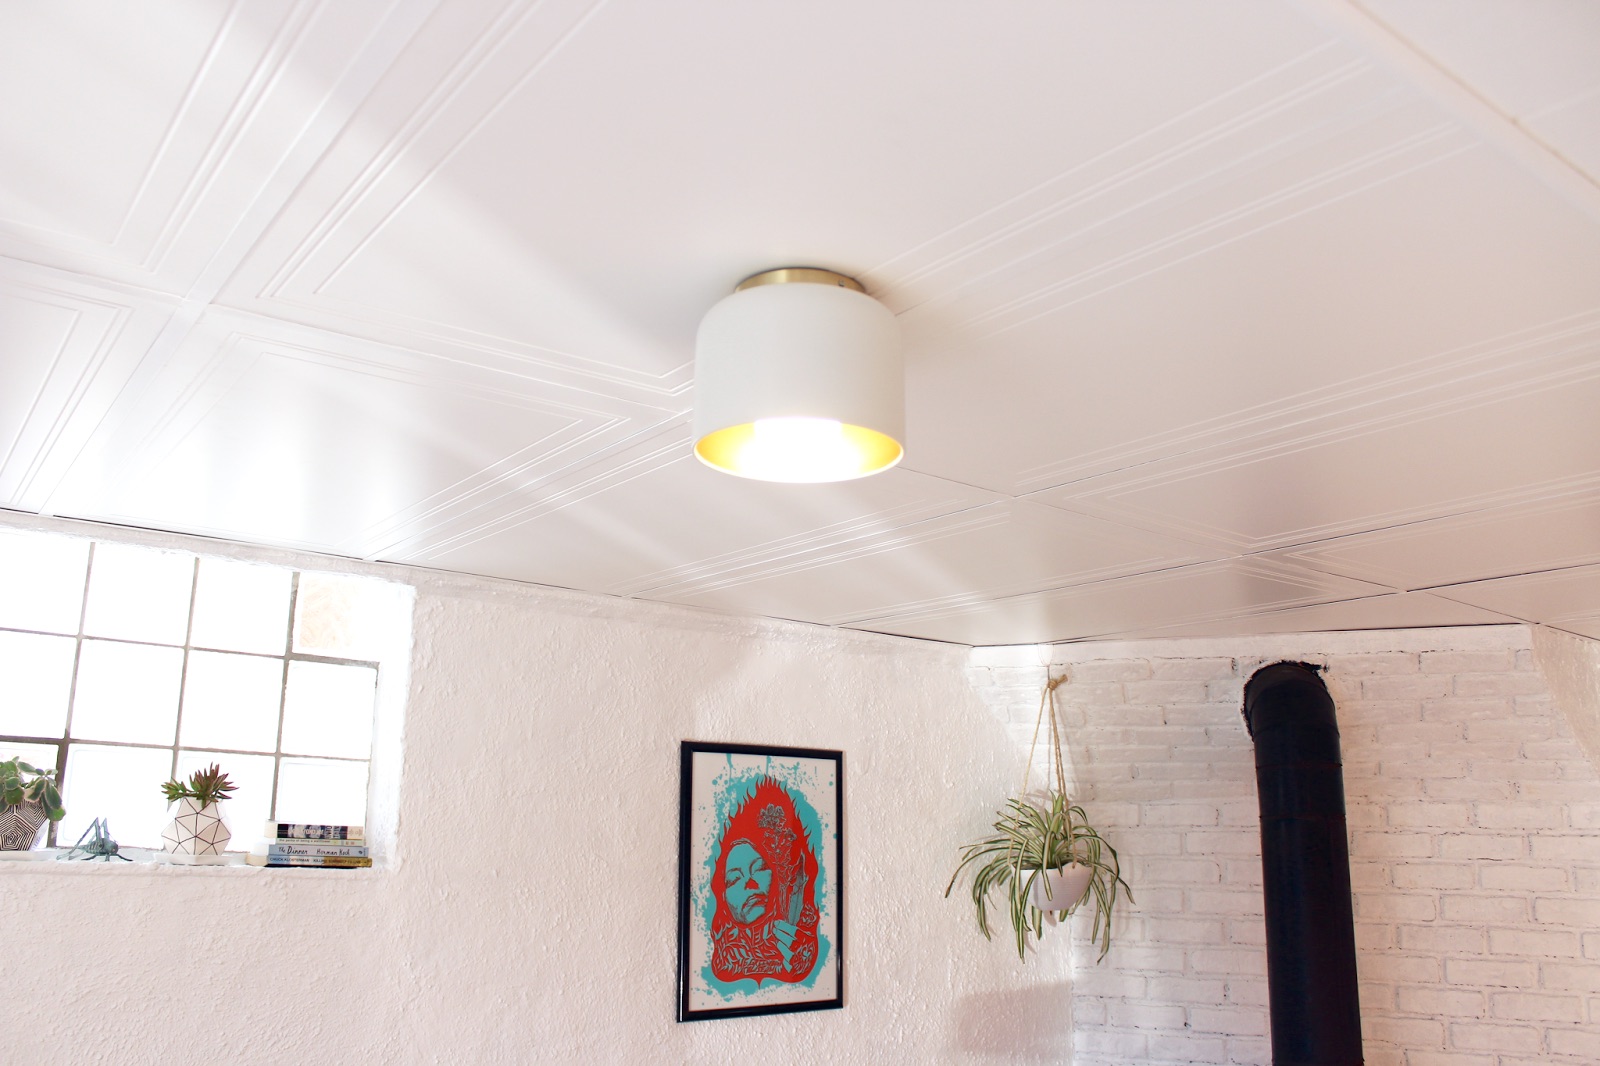 How To Make A Drop Ceiling Look Better